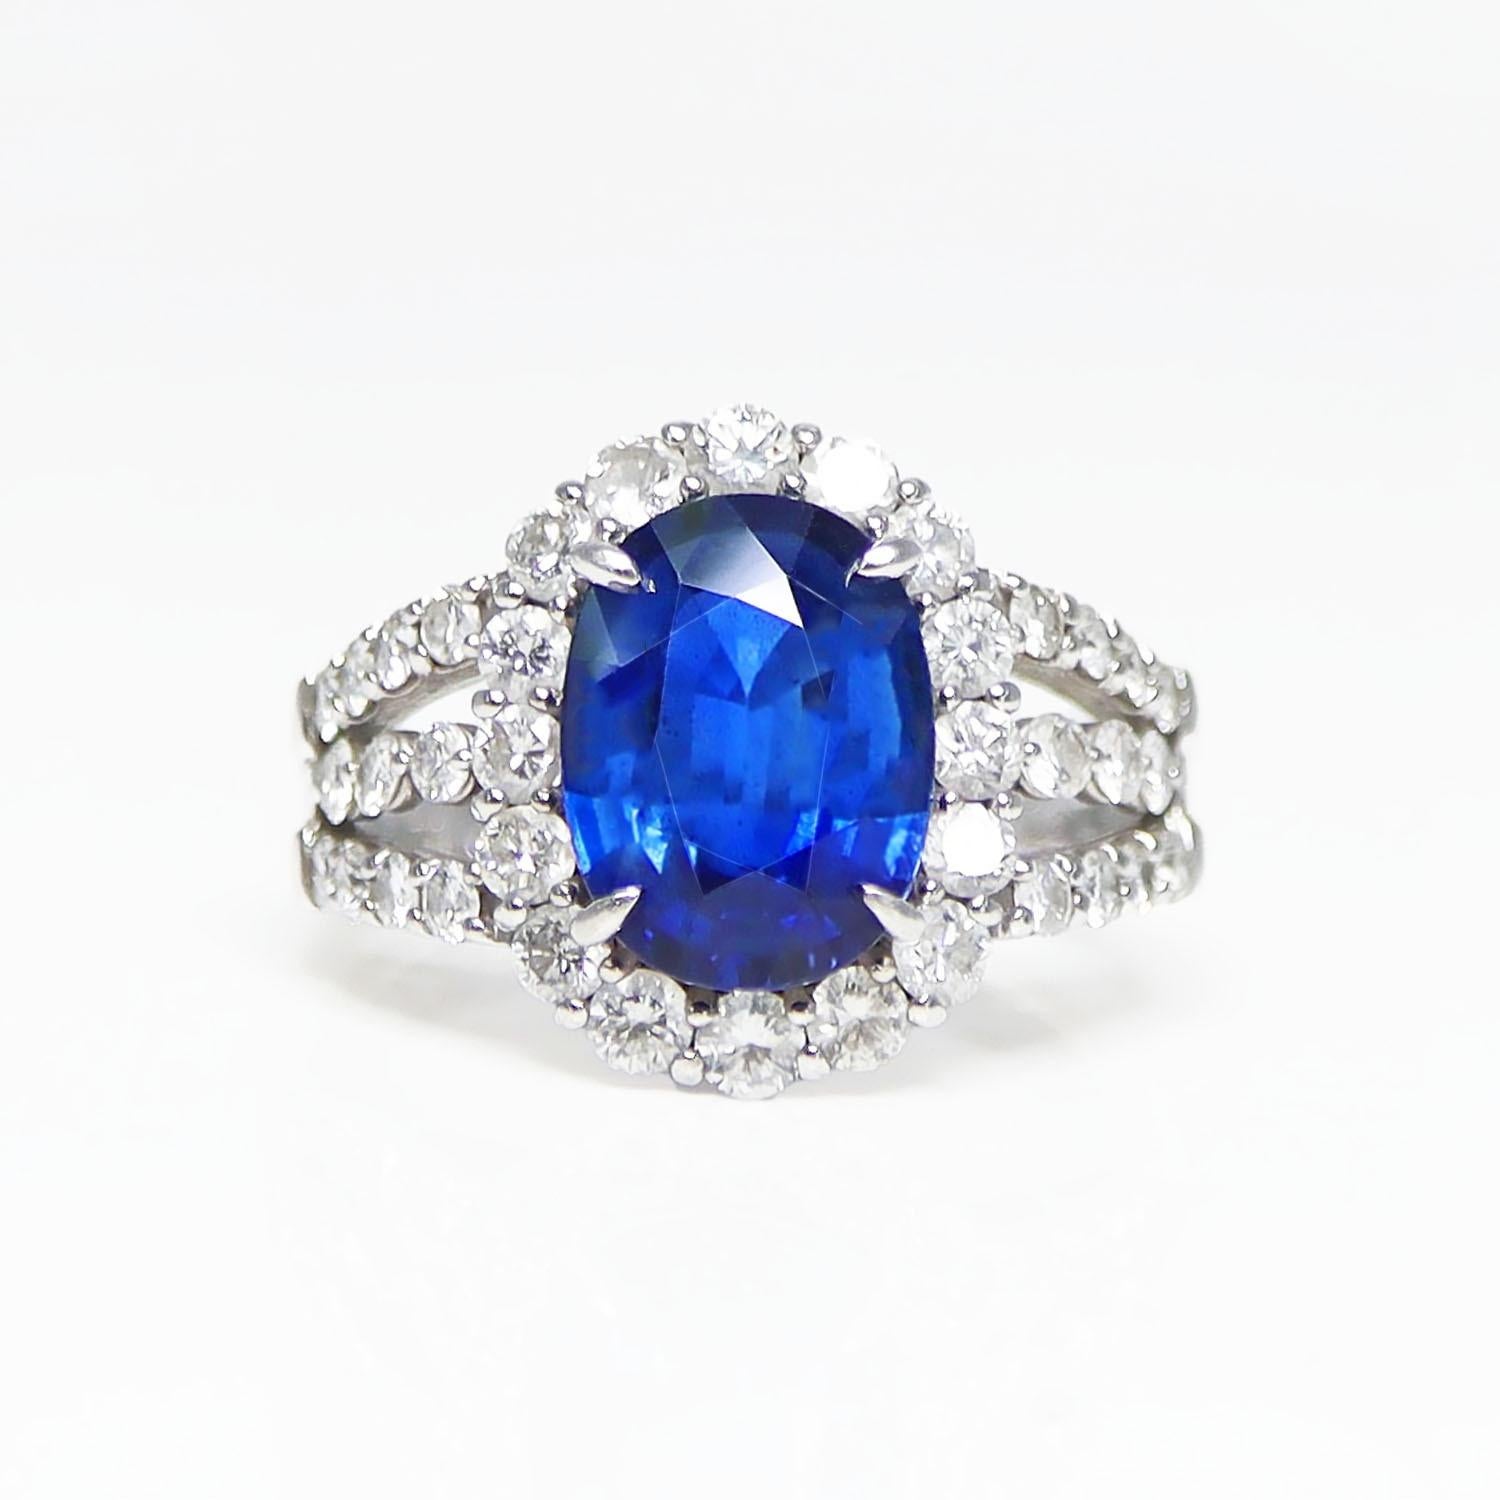 *Certified PT950 4.82 ct Unheated Royal Blue Sapphire&Diamonds Antique Art Deco Engagement Ring*

CGL-Certified natural royal blue sapphire as the center stone weighing 4.82 ct set on the PT950 white platinum halo design and pave' band with natural